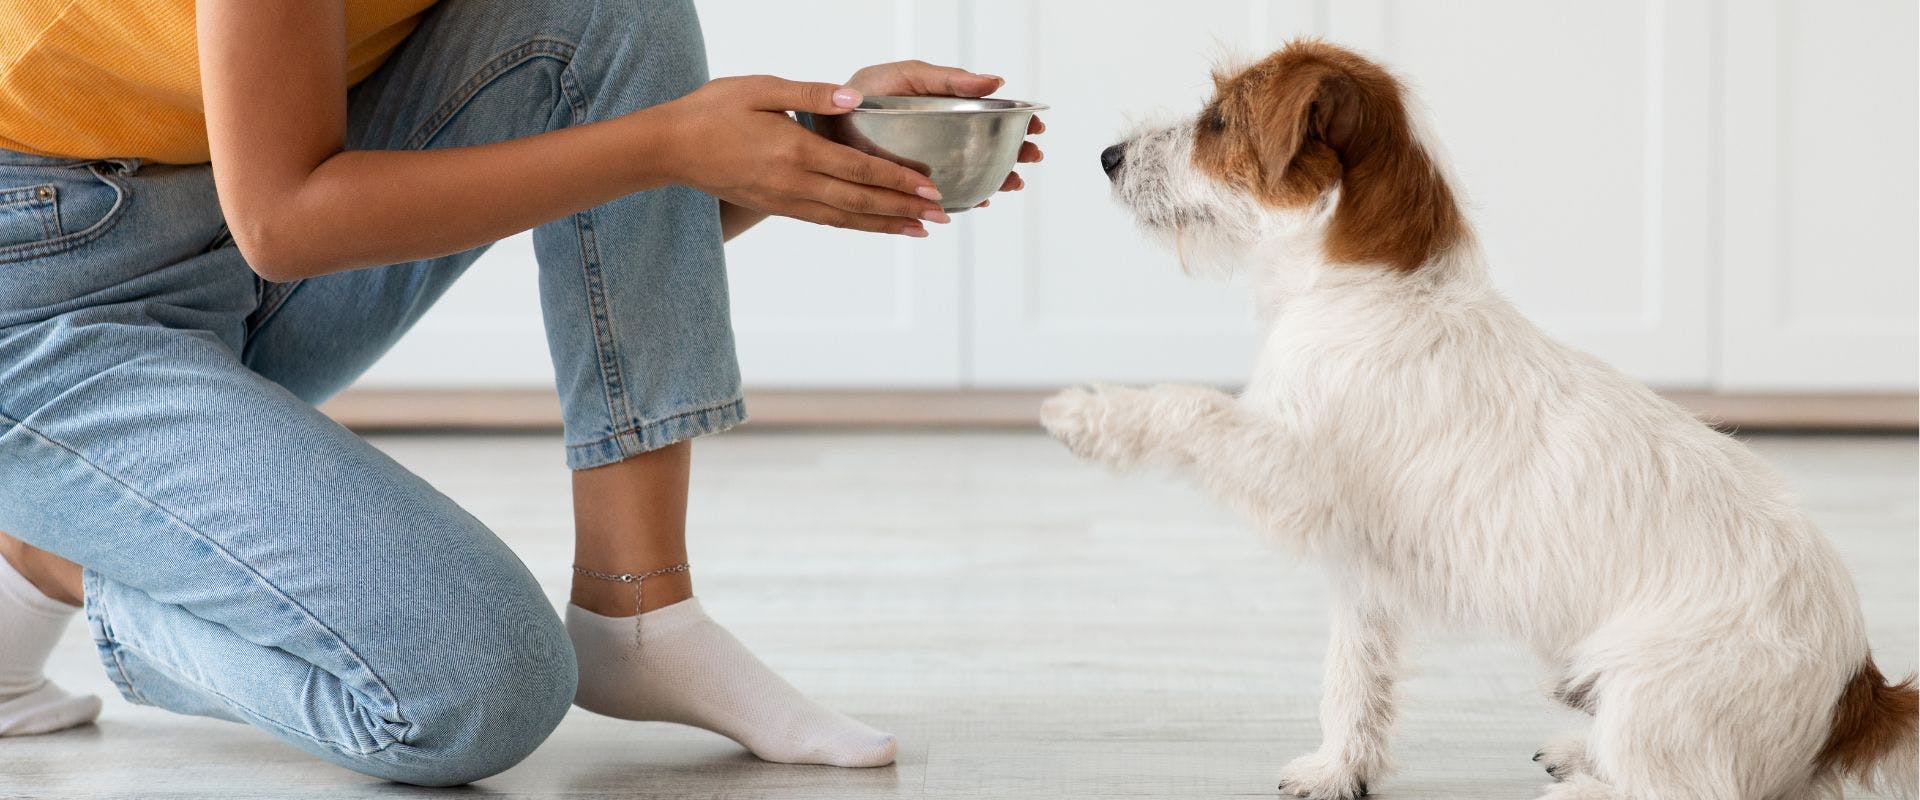 Jack Russell dog giving paw for a bowl of food